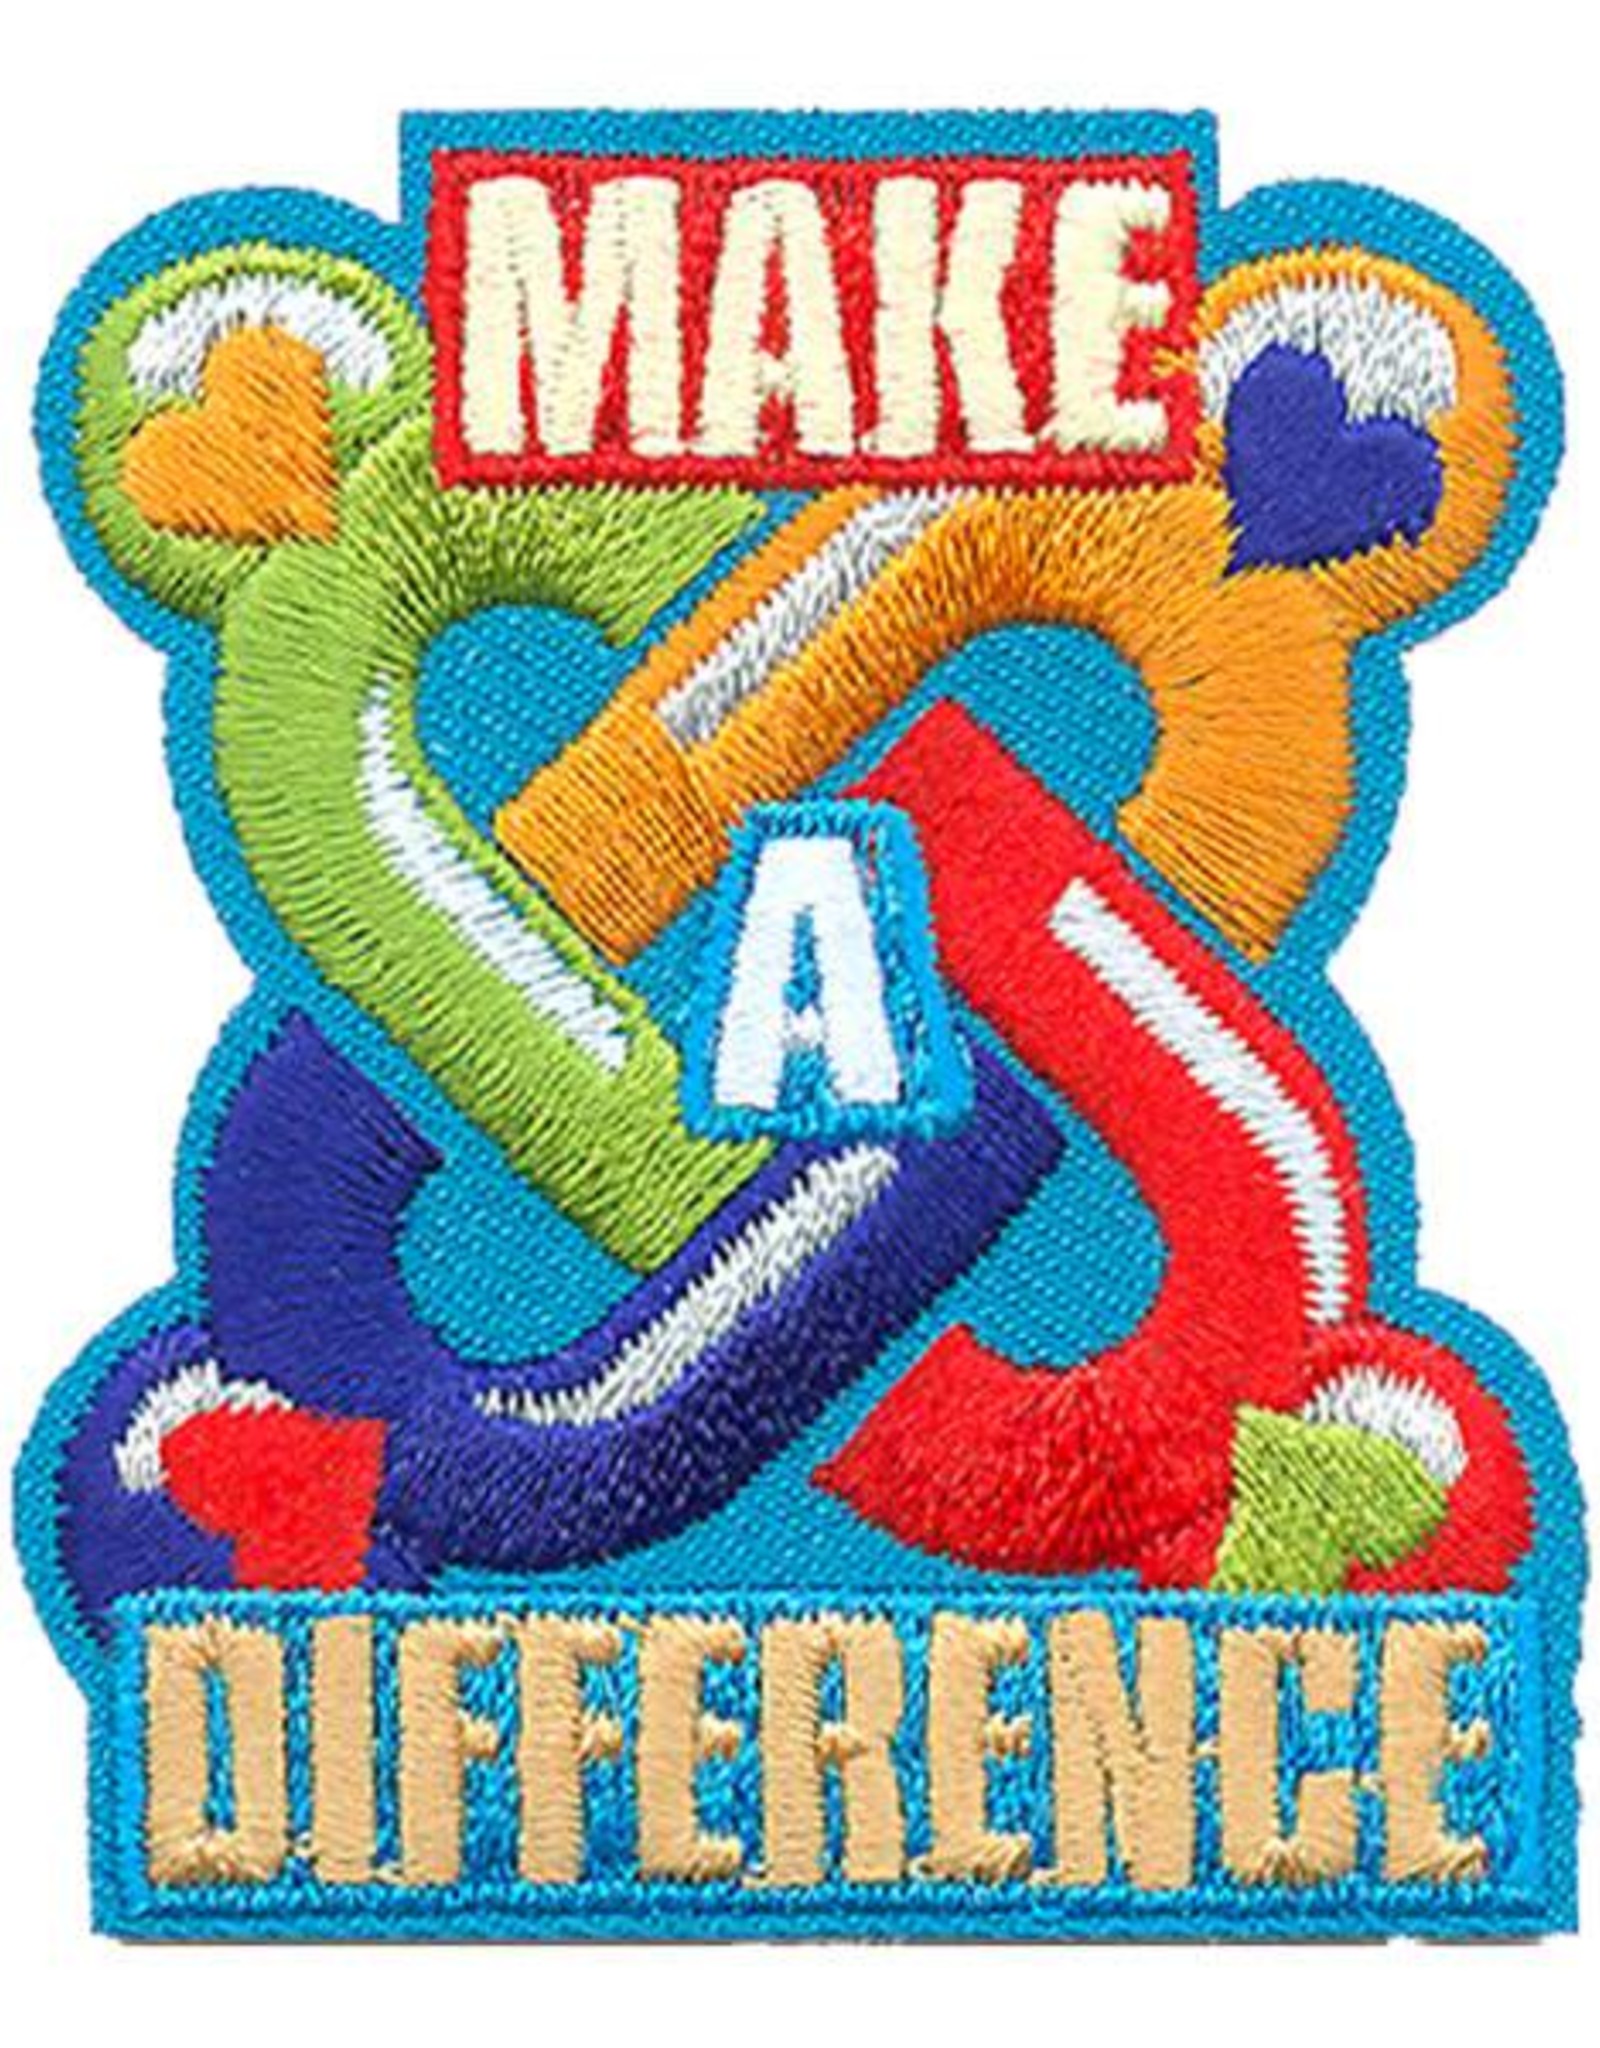 *Make A Difference Fun Patch